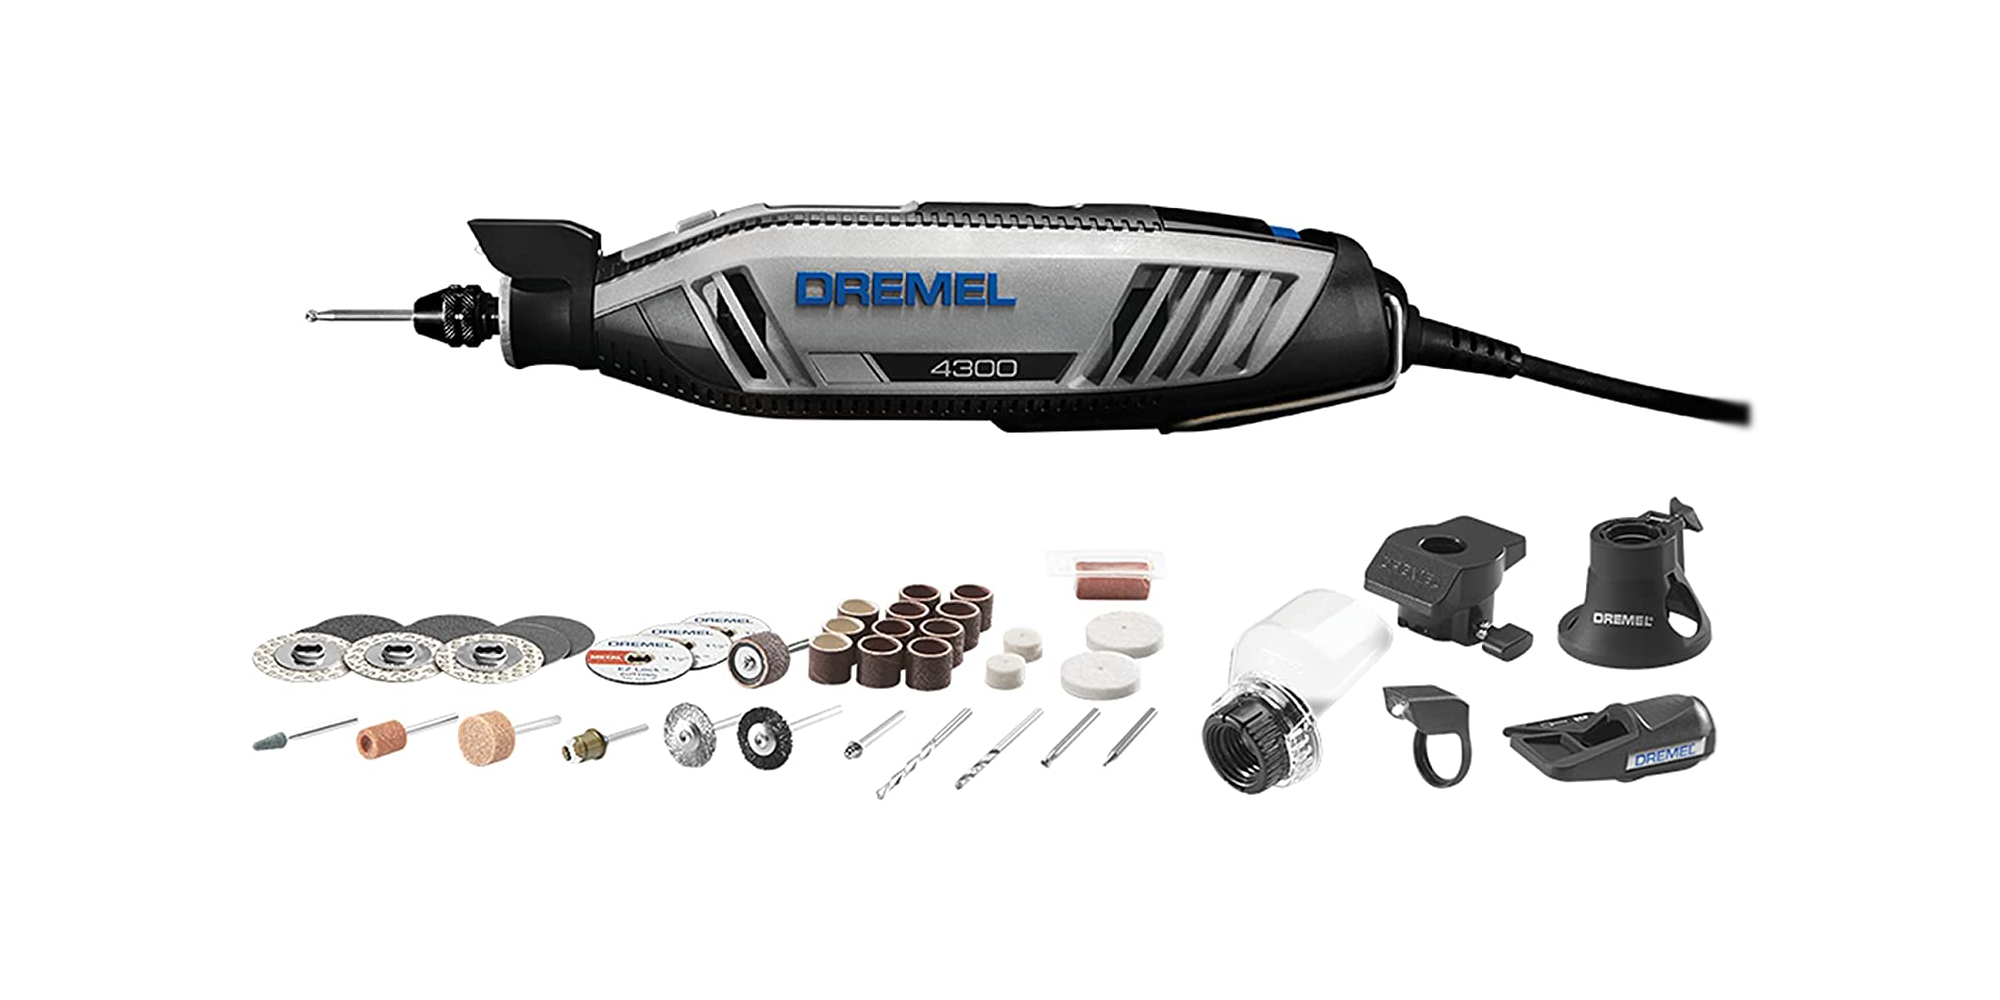 Dremel's 4300 rotary tool comes with five attachments and 40